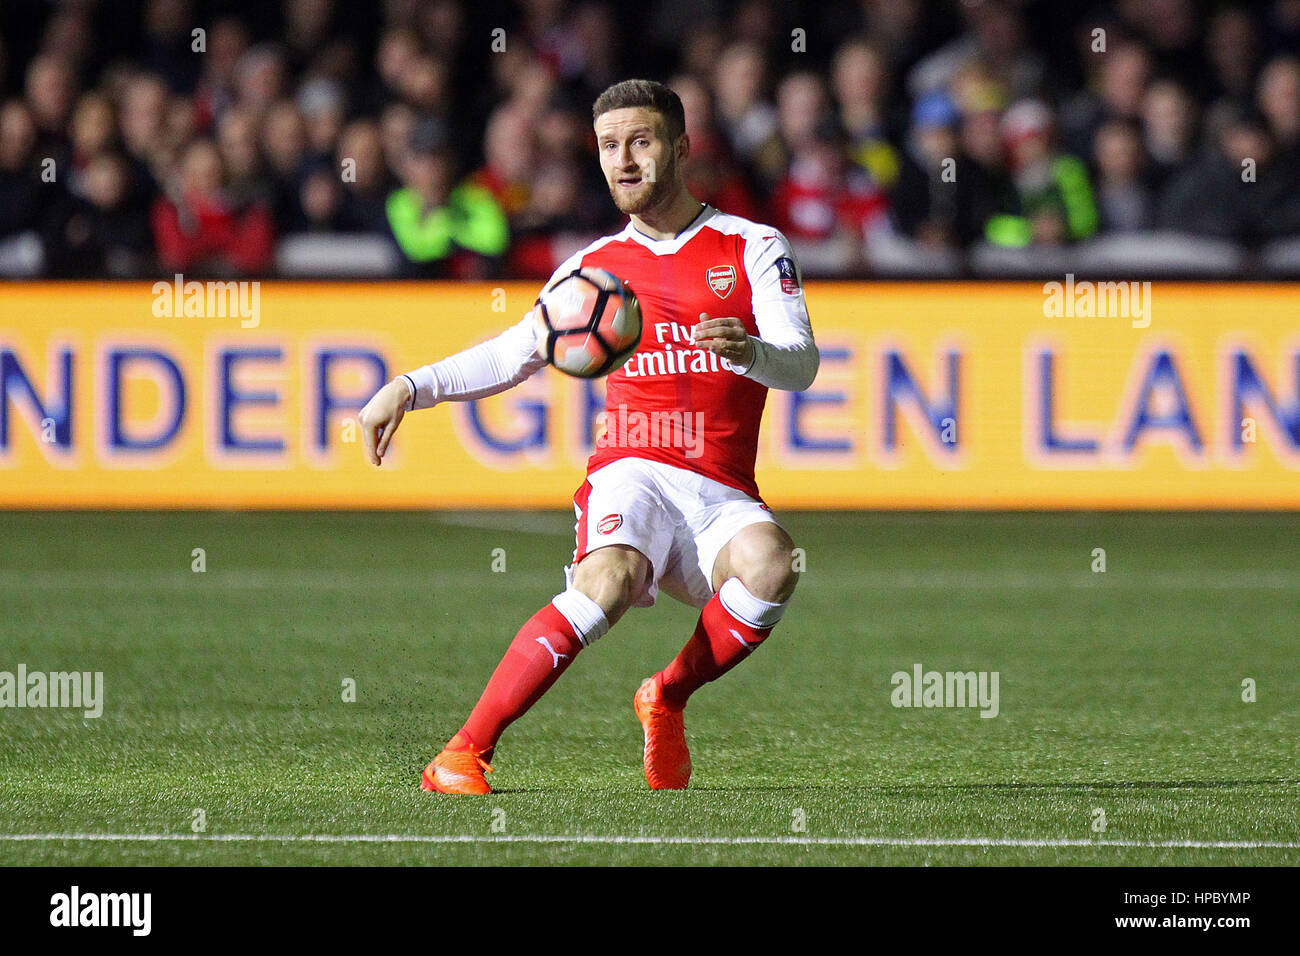 Sutton, UK. 20th Feb, 2017. Shkodran Mustafi of Arsenal in action during the FA Cup Fifth Round match between Sutton United and Arsenal at Borough Sports Ground on February 20th 2017 in Sutton, England. Credit: Daniel Chesterton/Alamy Live News Stock Photo